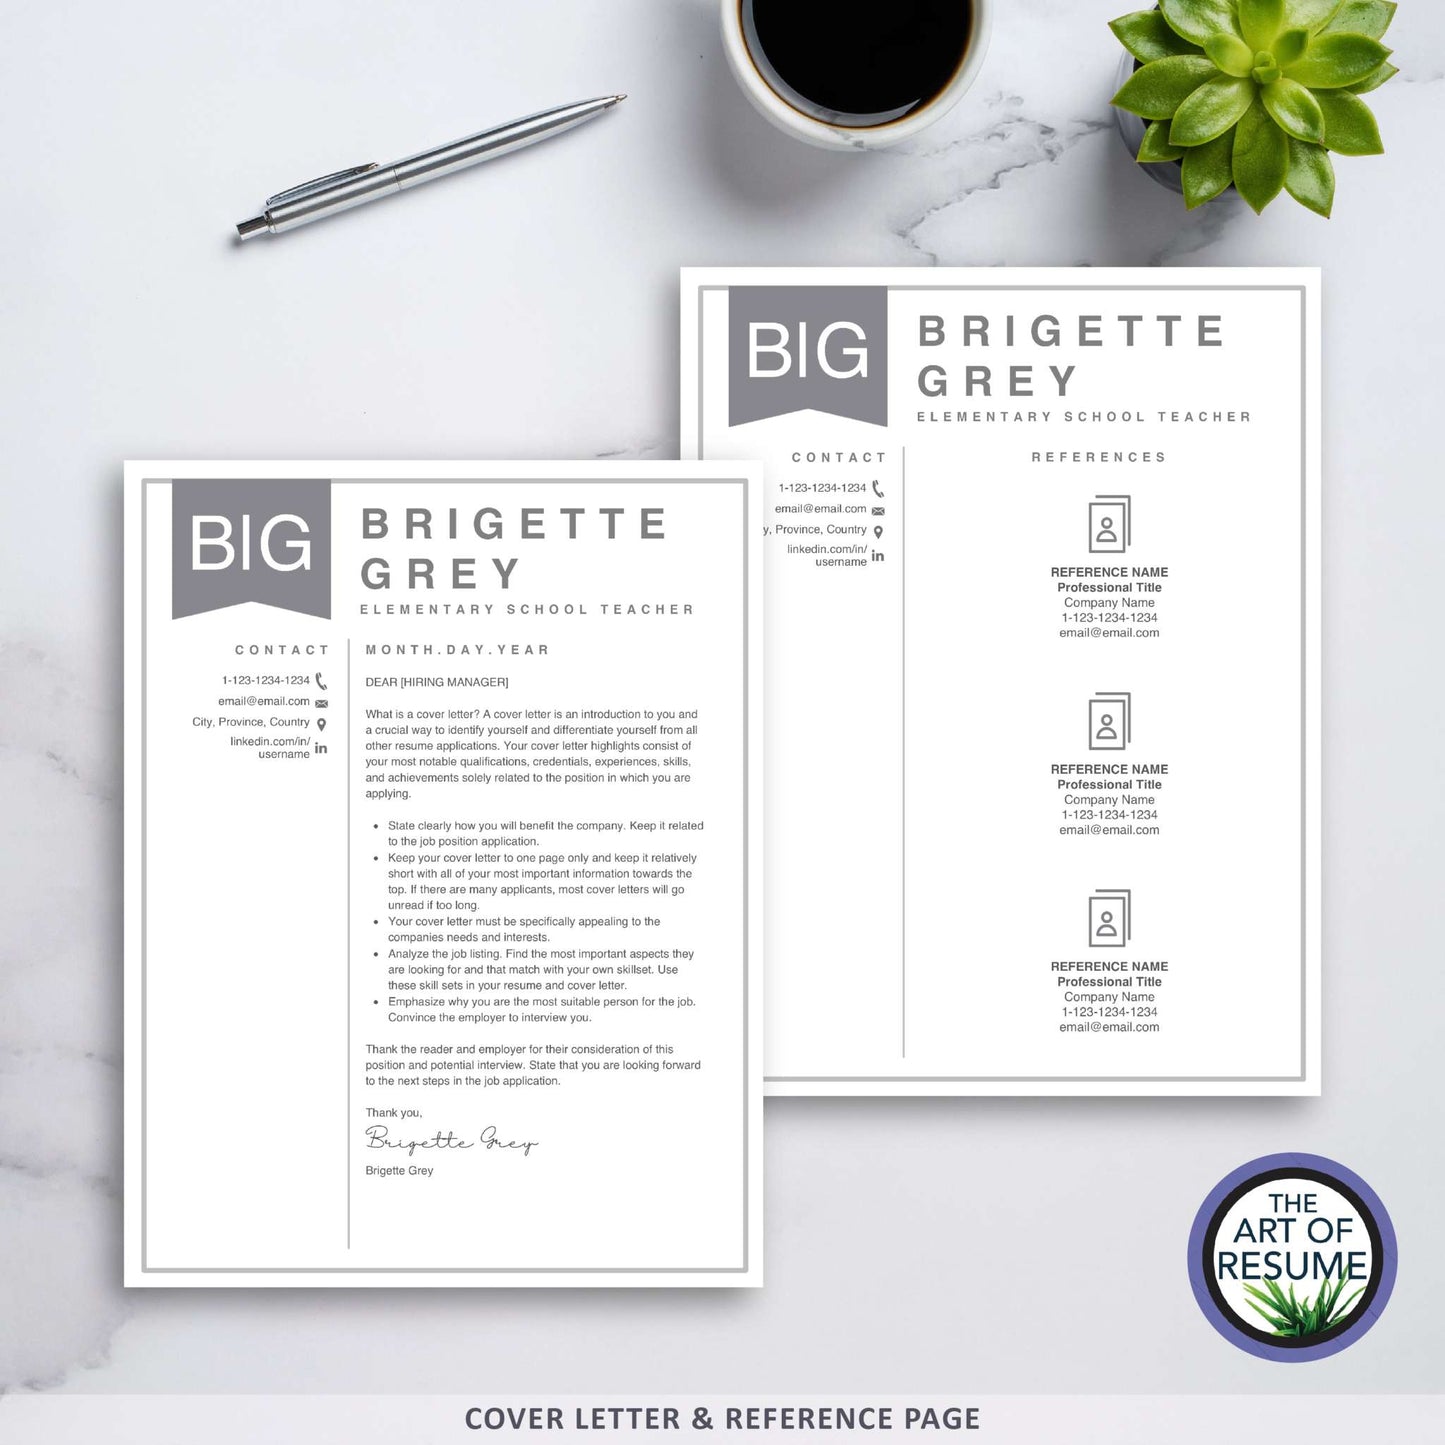 Cover Letter & Reference Page - The Art of Resume - Curriculum Vitae, Resumes, CV Templates for Teacher with Free Cover Letter